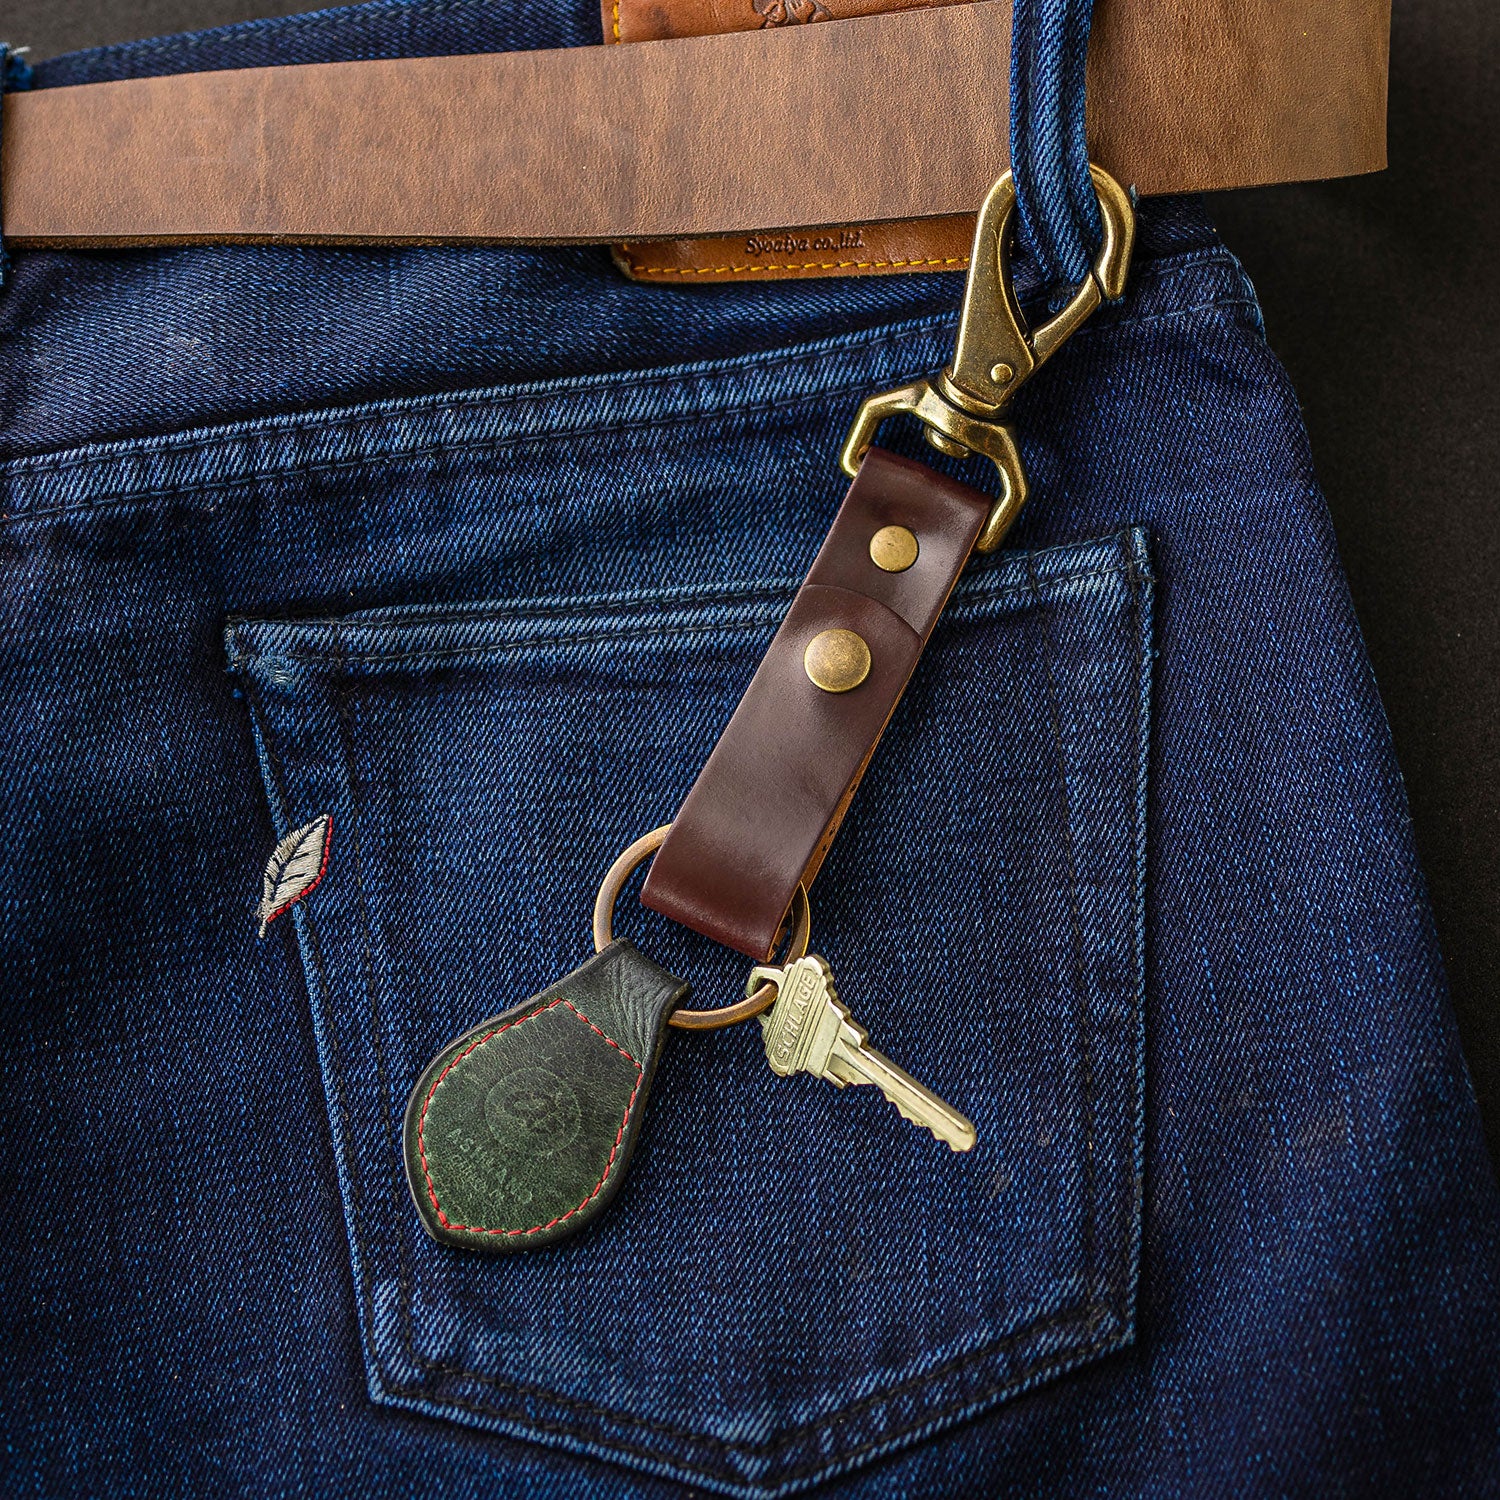 Belt Clip Key Chain Loop by Halo Halo Creations – Pop Cycle Tucson